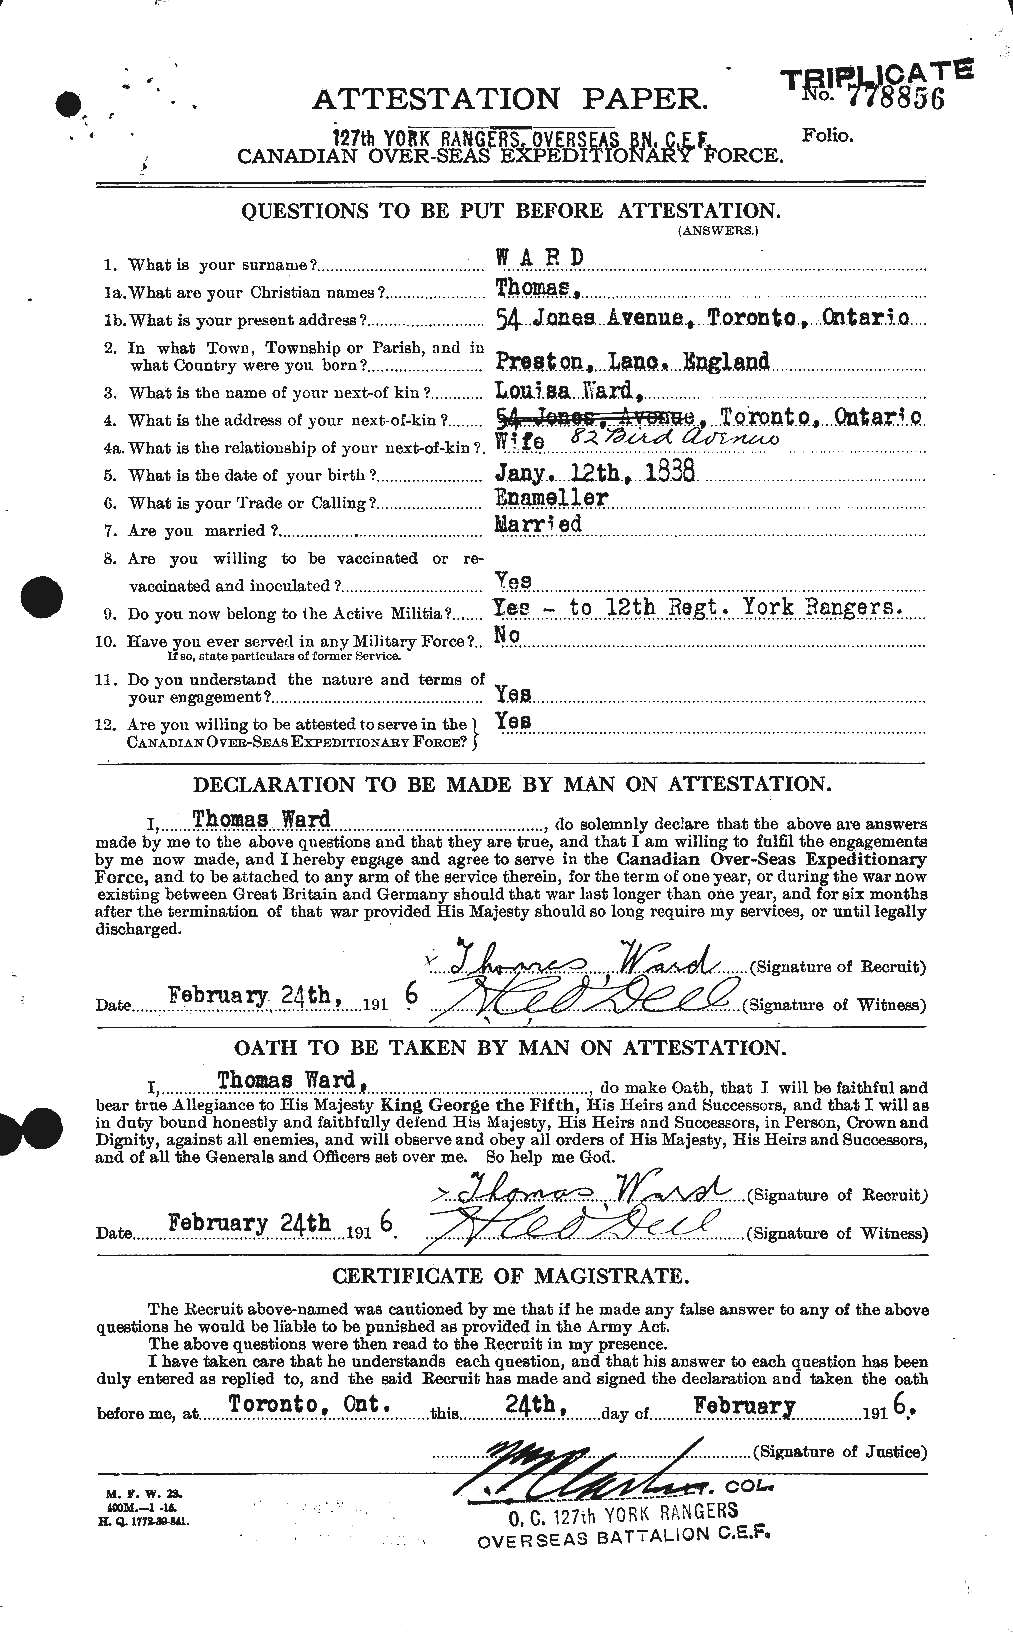 Personnel Records of the First World War - CEF 659710a